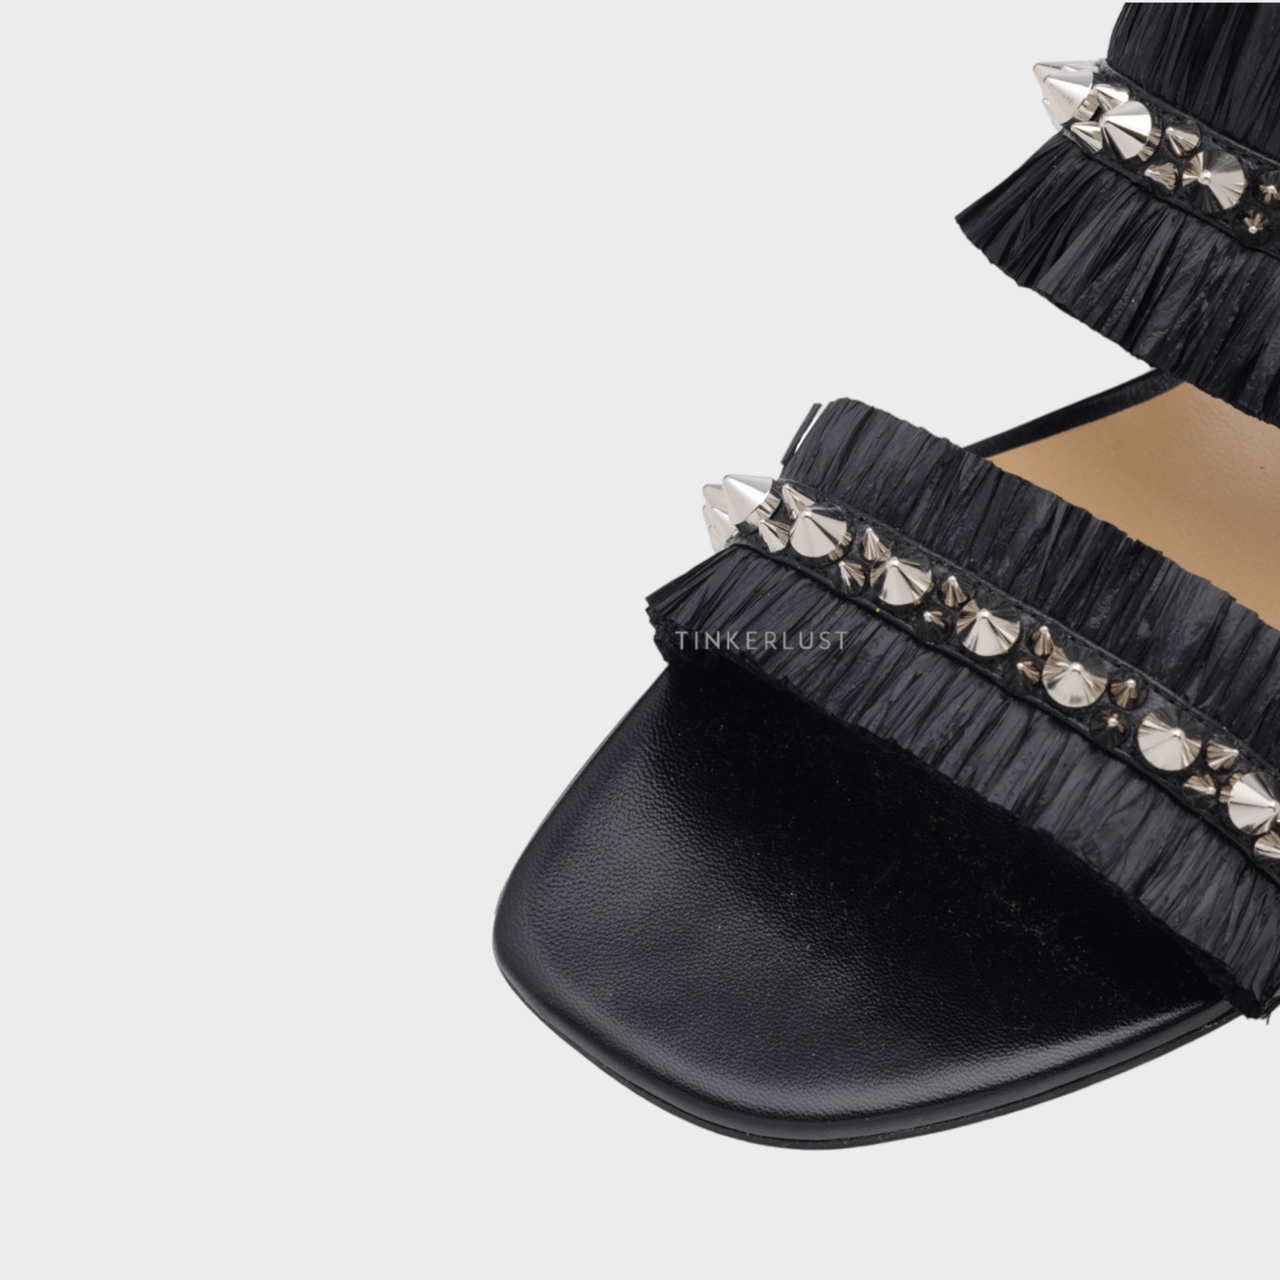 Christian Louboutin Marivodou Raffia Flat Sandals in Black with Silver Spikes 